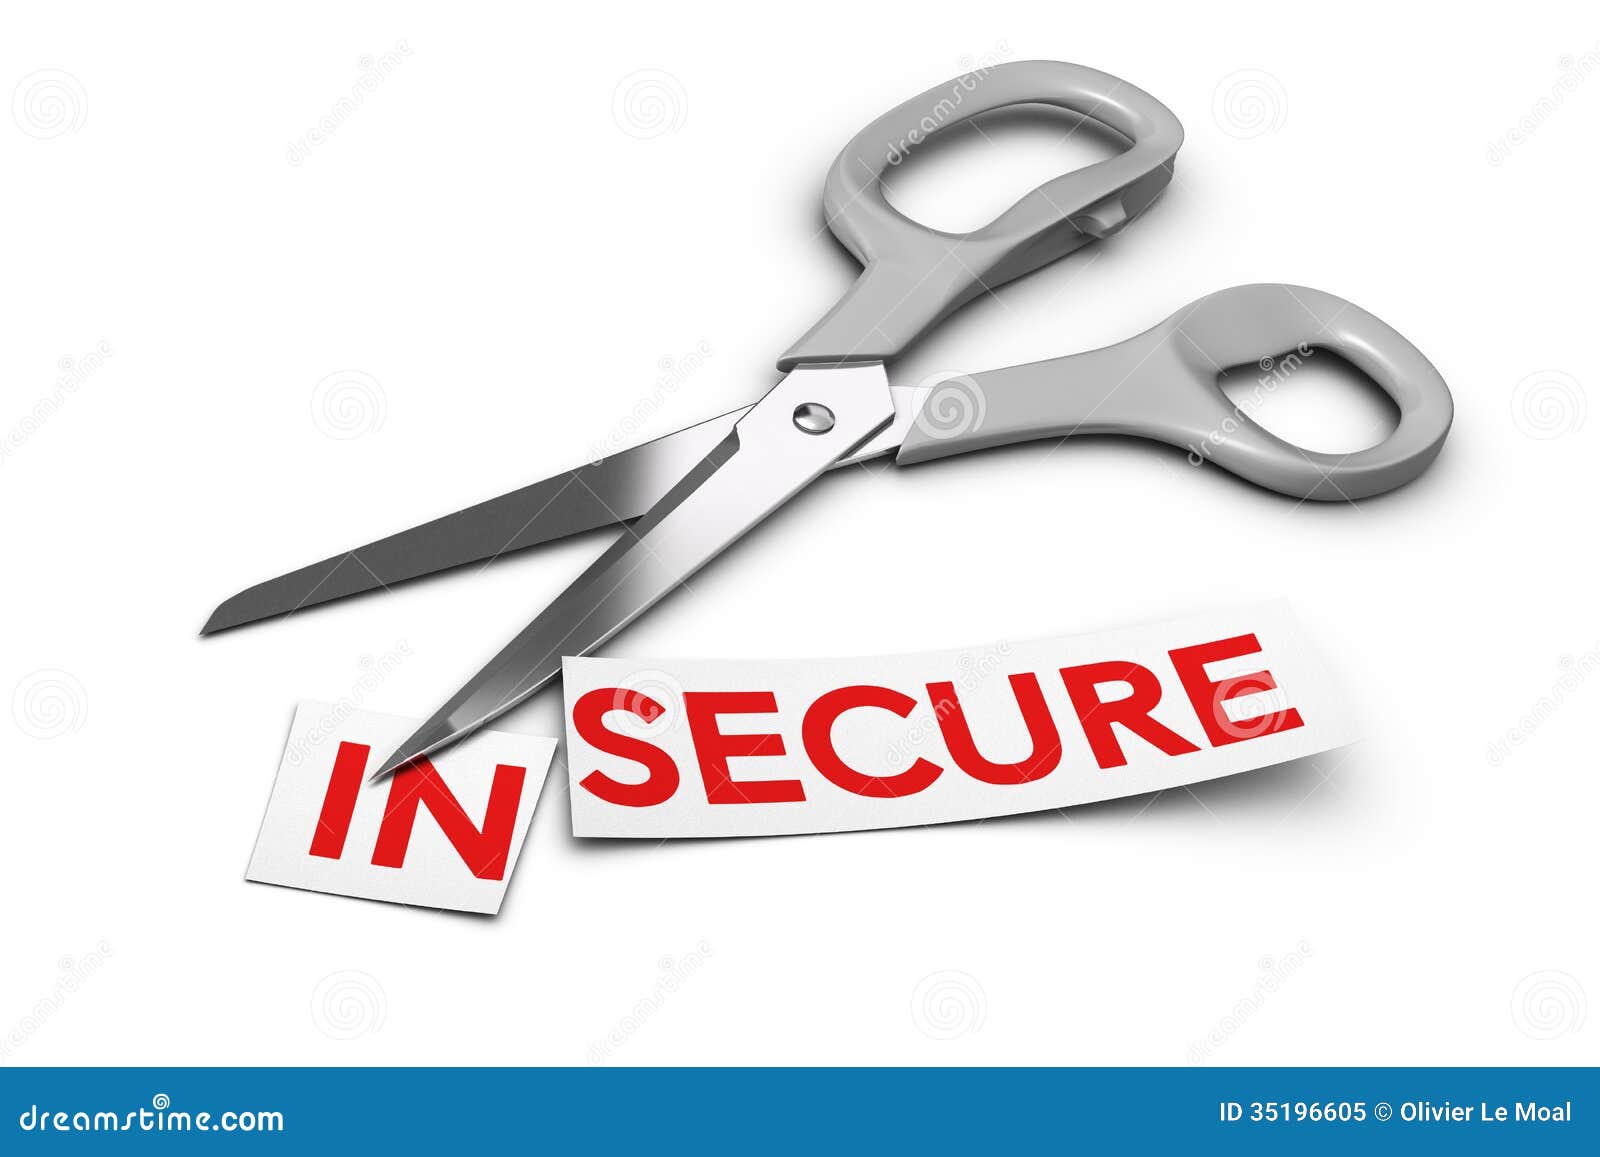 insecure-vs-secure-security-concept-word-cut-two-parts-scissors-background-d-render-over-white-35196605.jpg